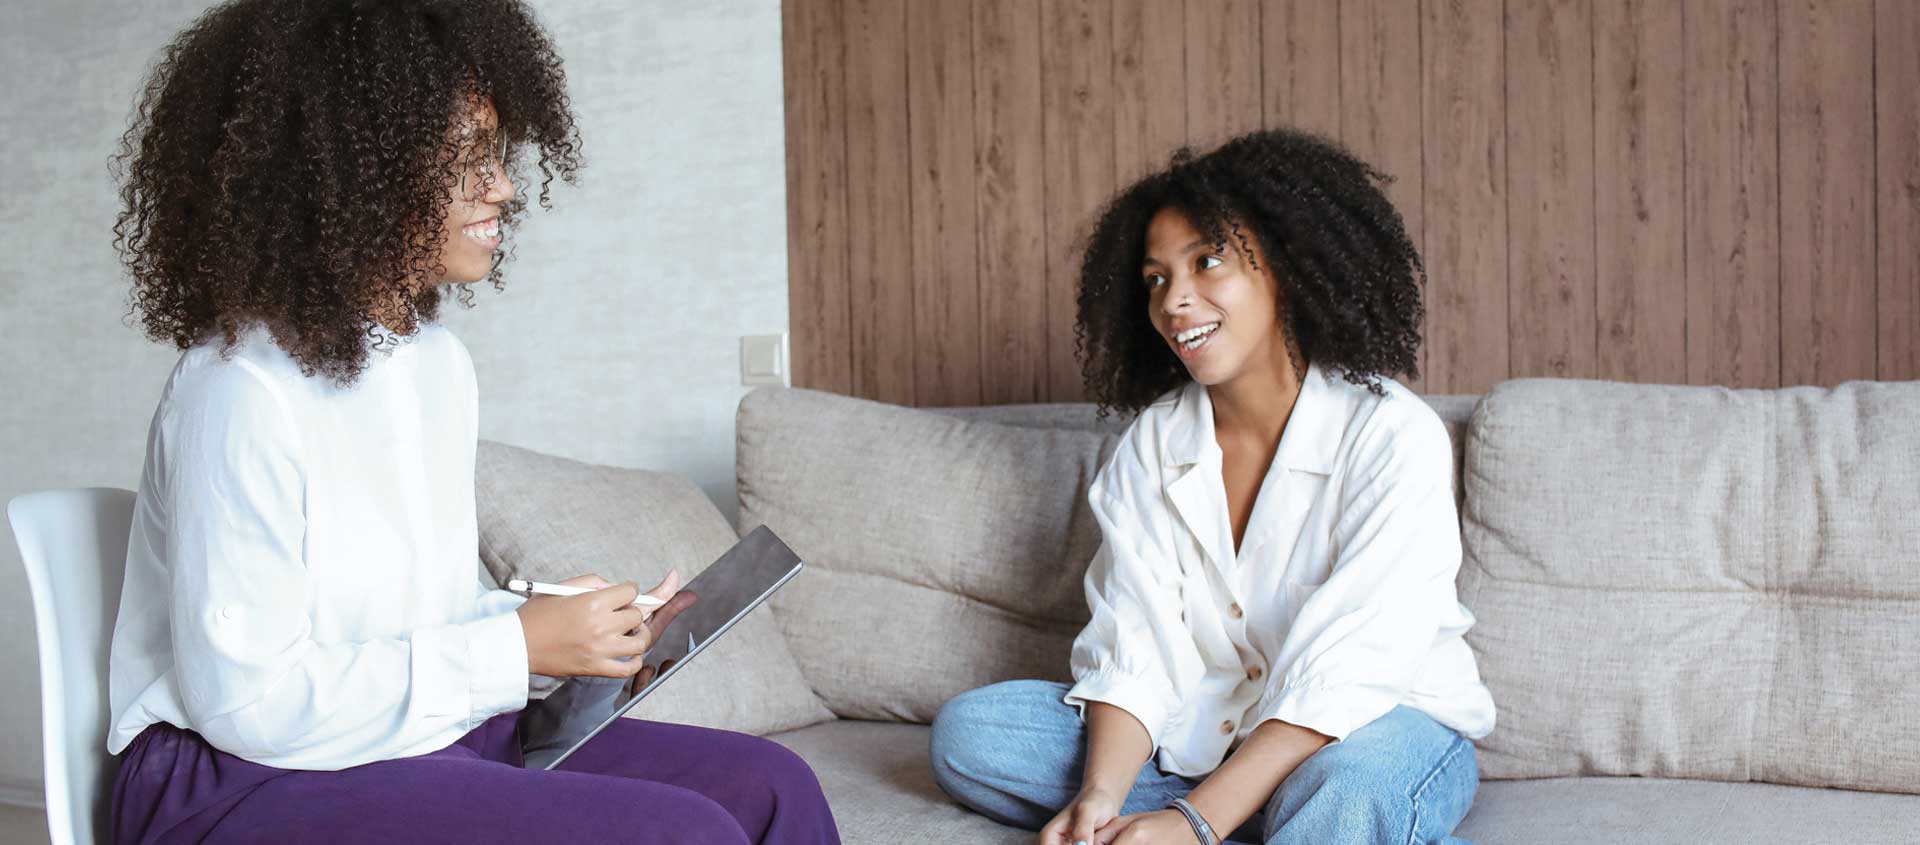 A Black American therapist talks with a Black American tween girl in an office.